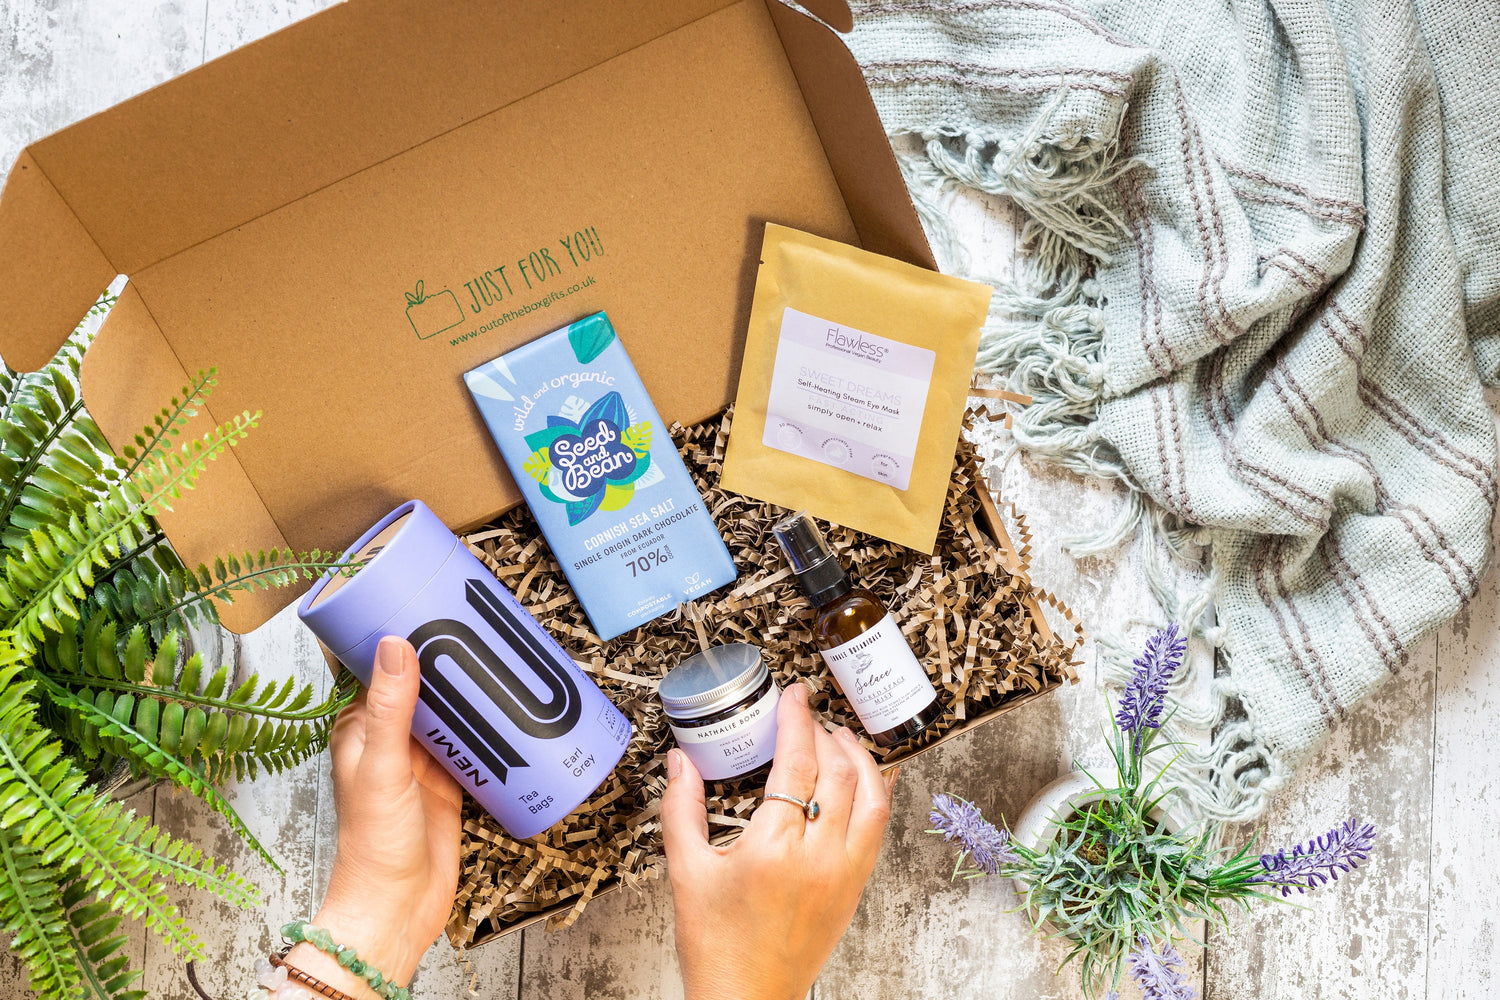 Gift box full of sustainable treats including chocolate, tea, self-care gifts